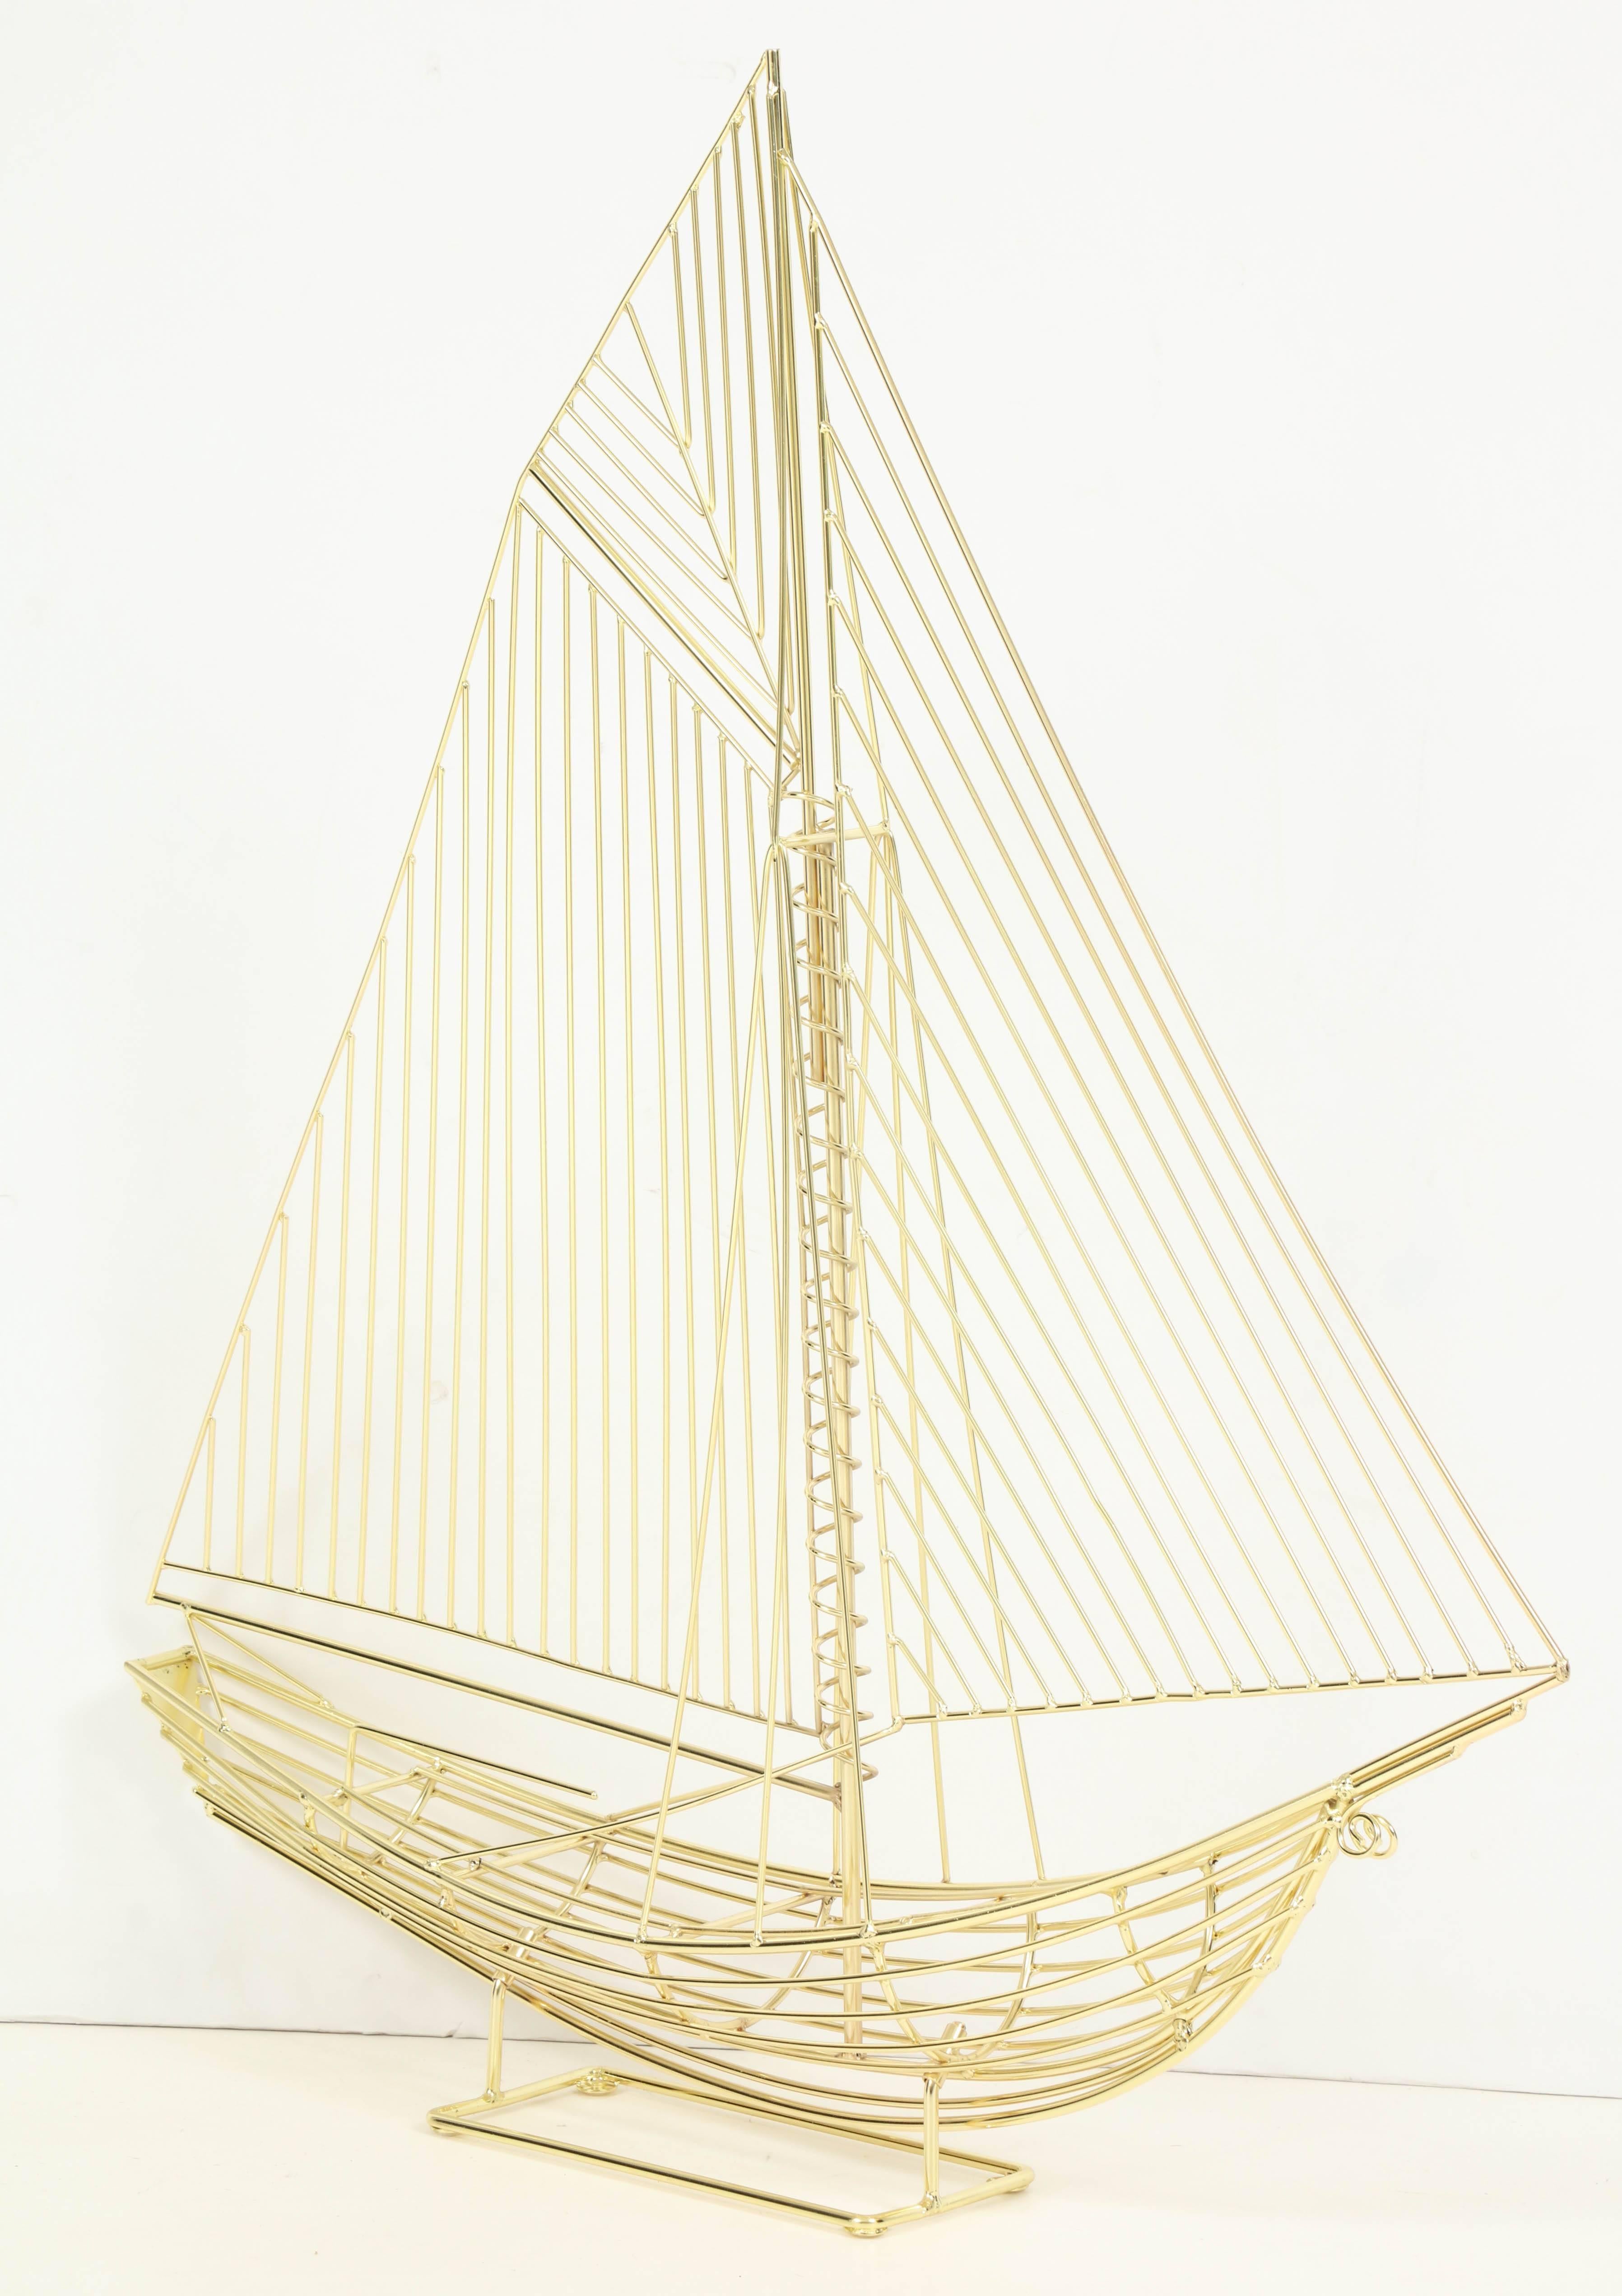 Curtis Jere boat or ship sculpture, signed, circa 1970. Newly professionally re-plated in brass. Original C. Jere label still attached. This sculpture is on display at the Gallery at 200 Lex at the New York Design Center.